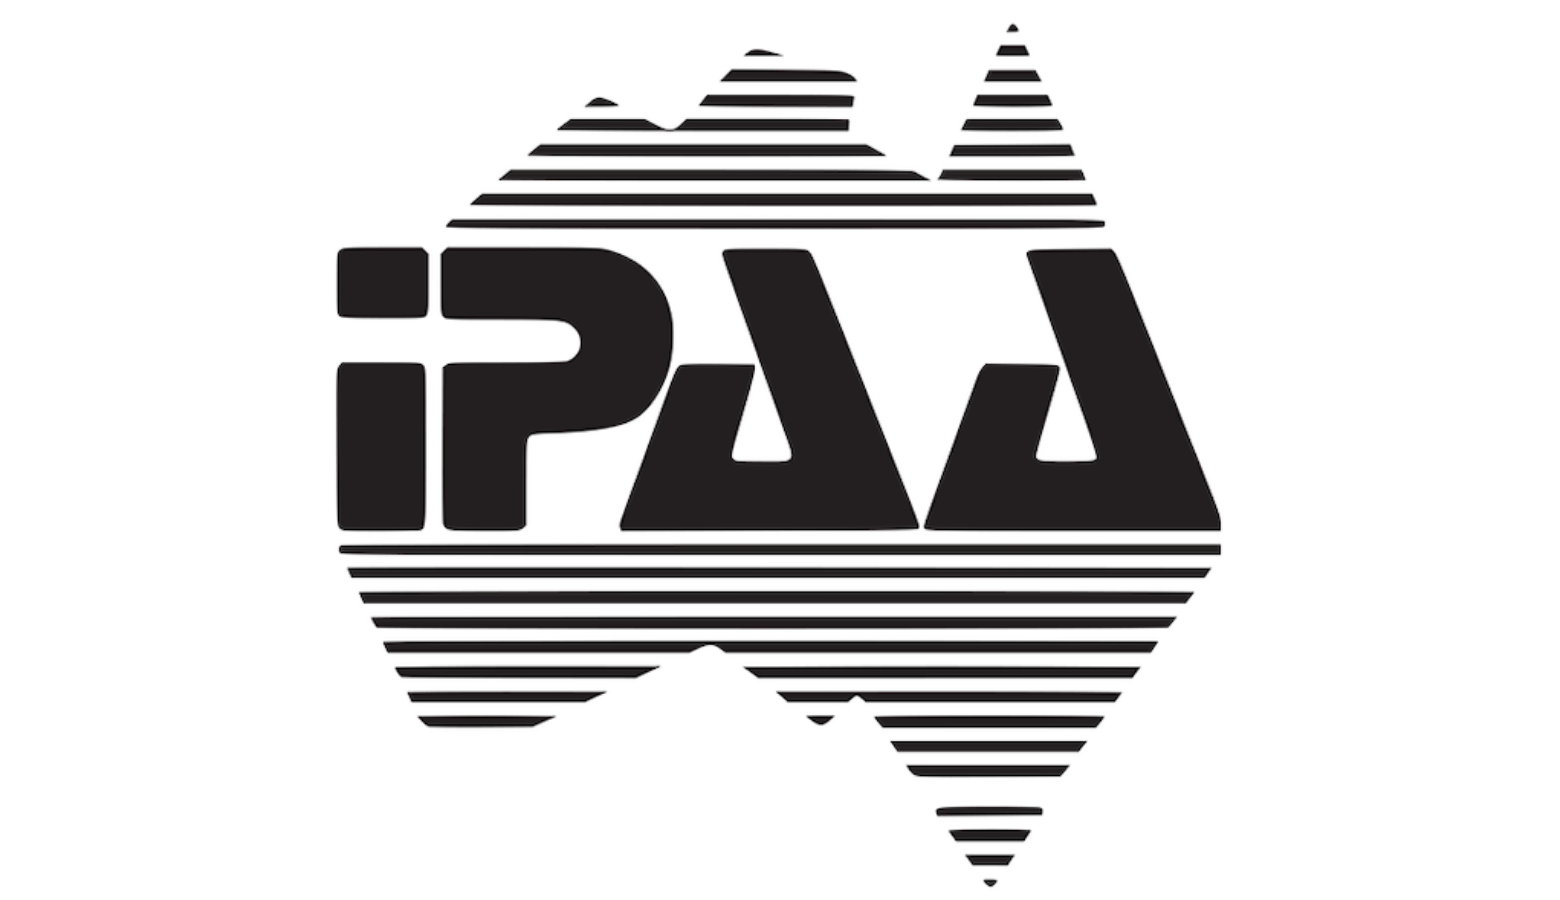 The old black-and-white IPAA logo featuring the letters “IPAA” rendered in a heavy, angular typeface reminiscent of a style popular in the 1980s, overlaid atop a stylized map of Australia filled in with vertical stripes.